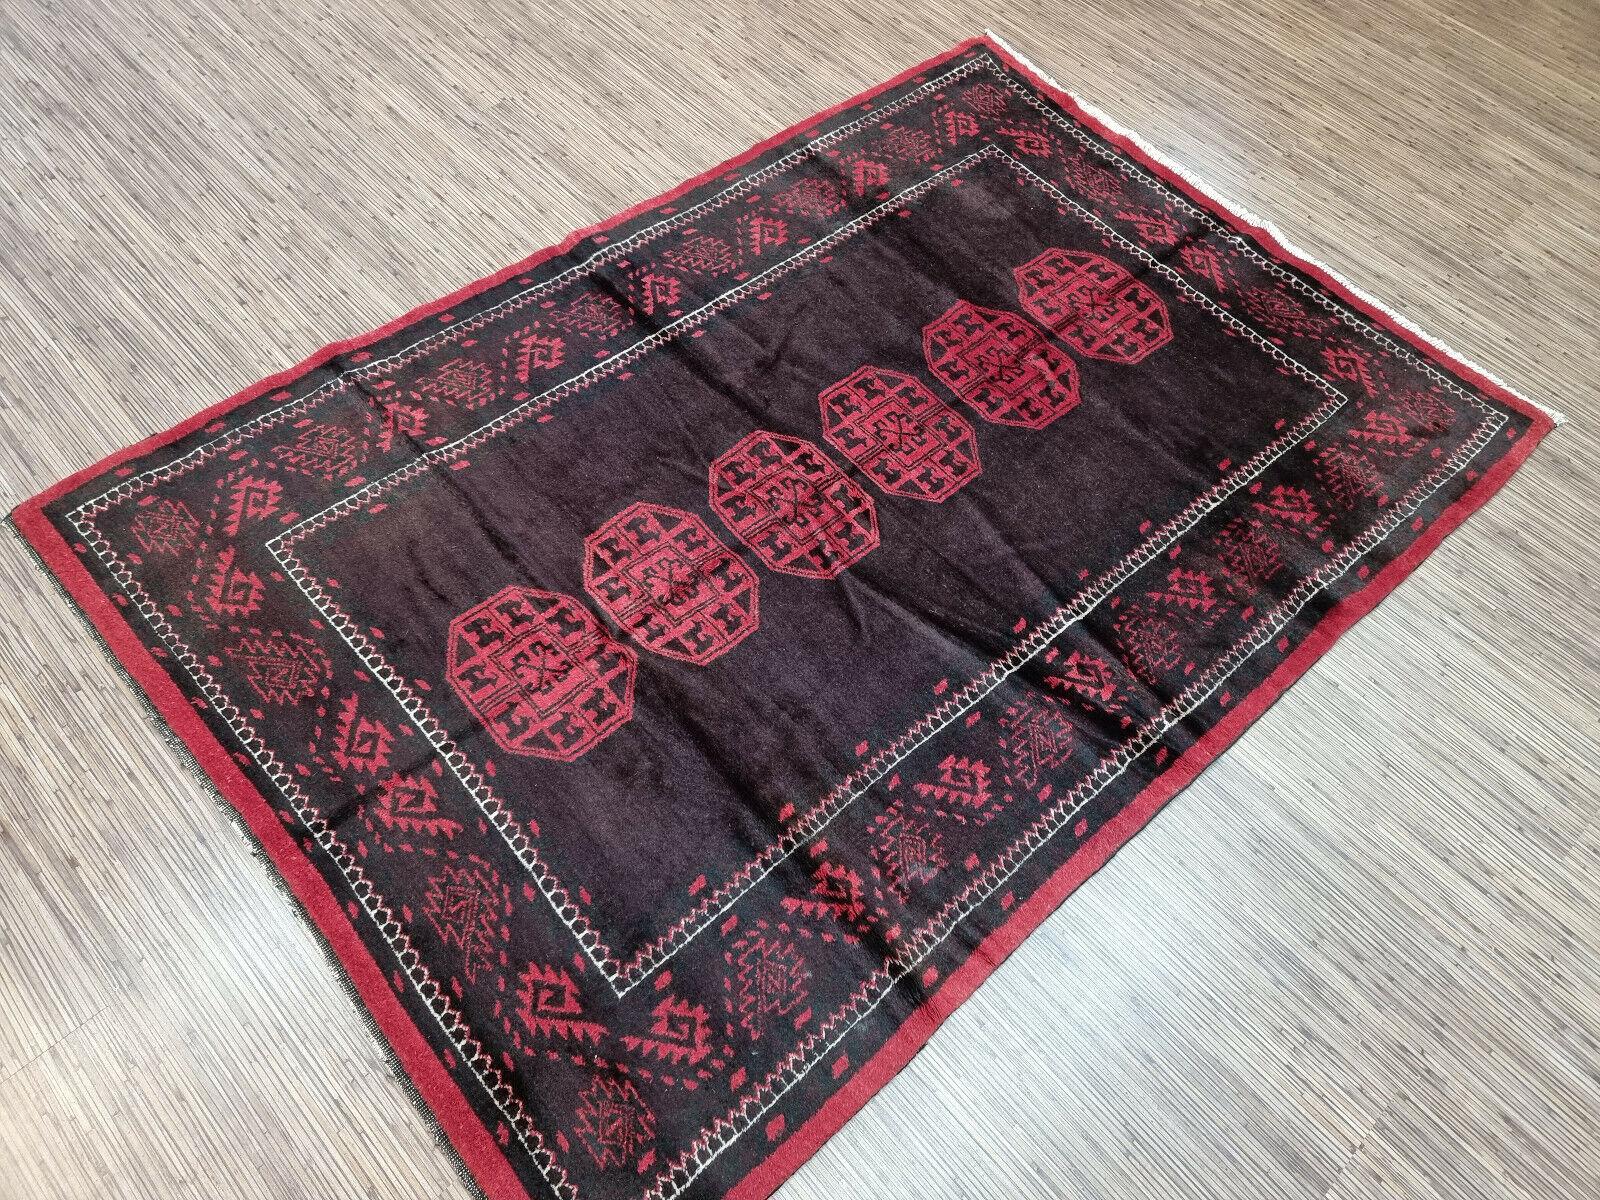 Handmade Vintage Afghan Baluch Rug 4' x 6.1', 1950s - 1D92 In Good Condition For Sale In Bordeaux, FR